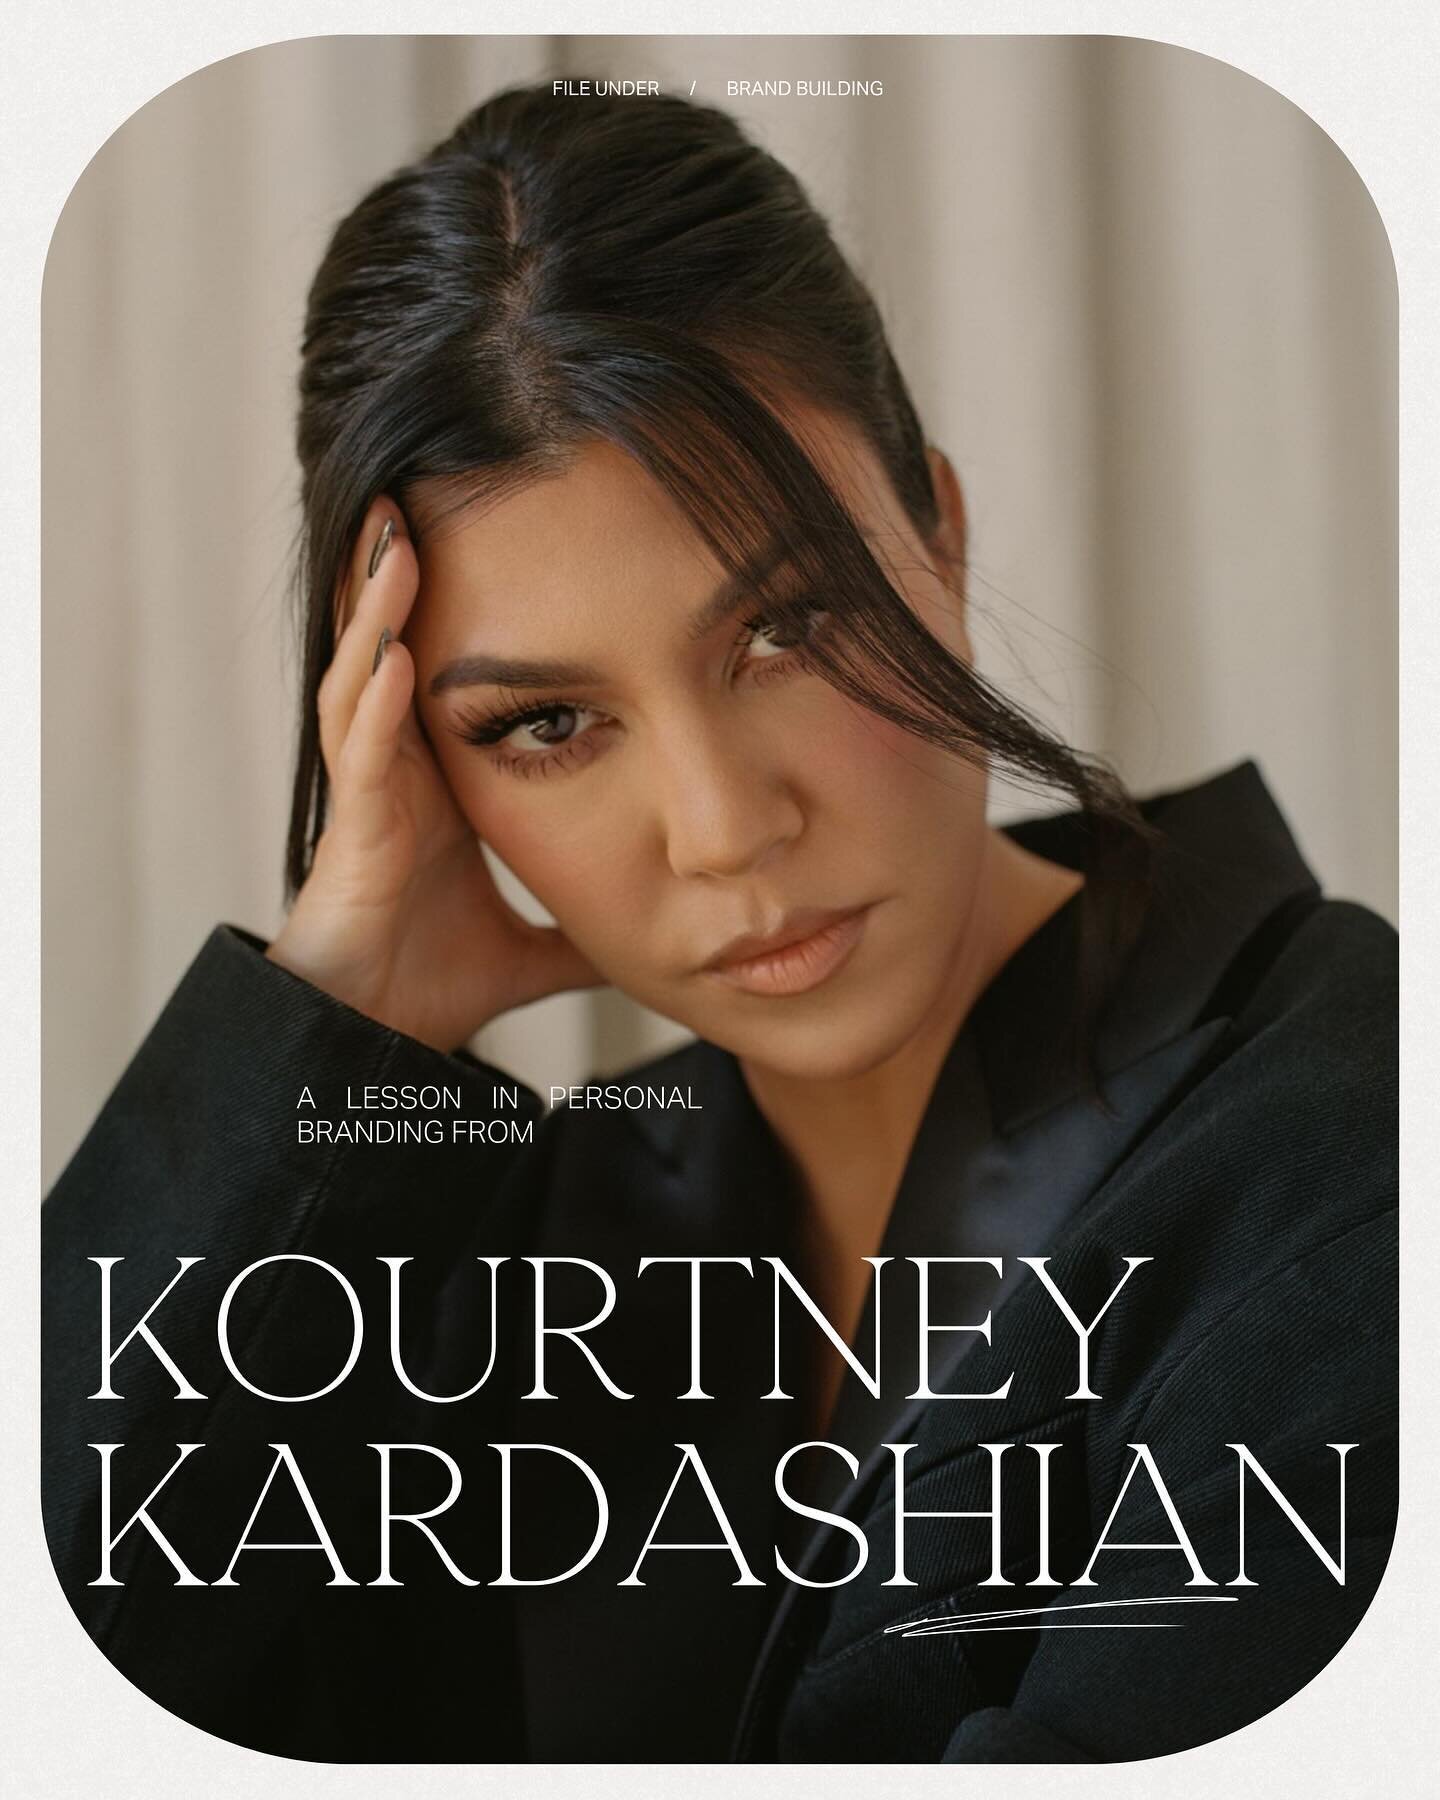 LET&rsquo;S SIMPLIFY WHAT A PERSONAL BRAND IS WITH THE HELP OF SOMEONE WE ALLLL KNOW &darr;

unless you live under a rock, you probs know a thing or two about Kourtney, her life and her personality, these are all part of what makes up what we know as